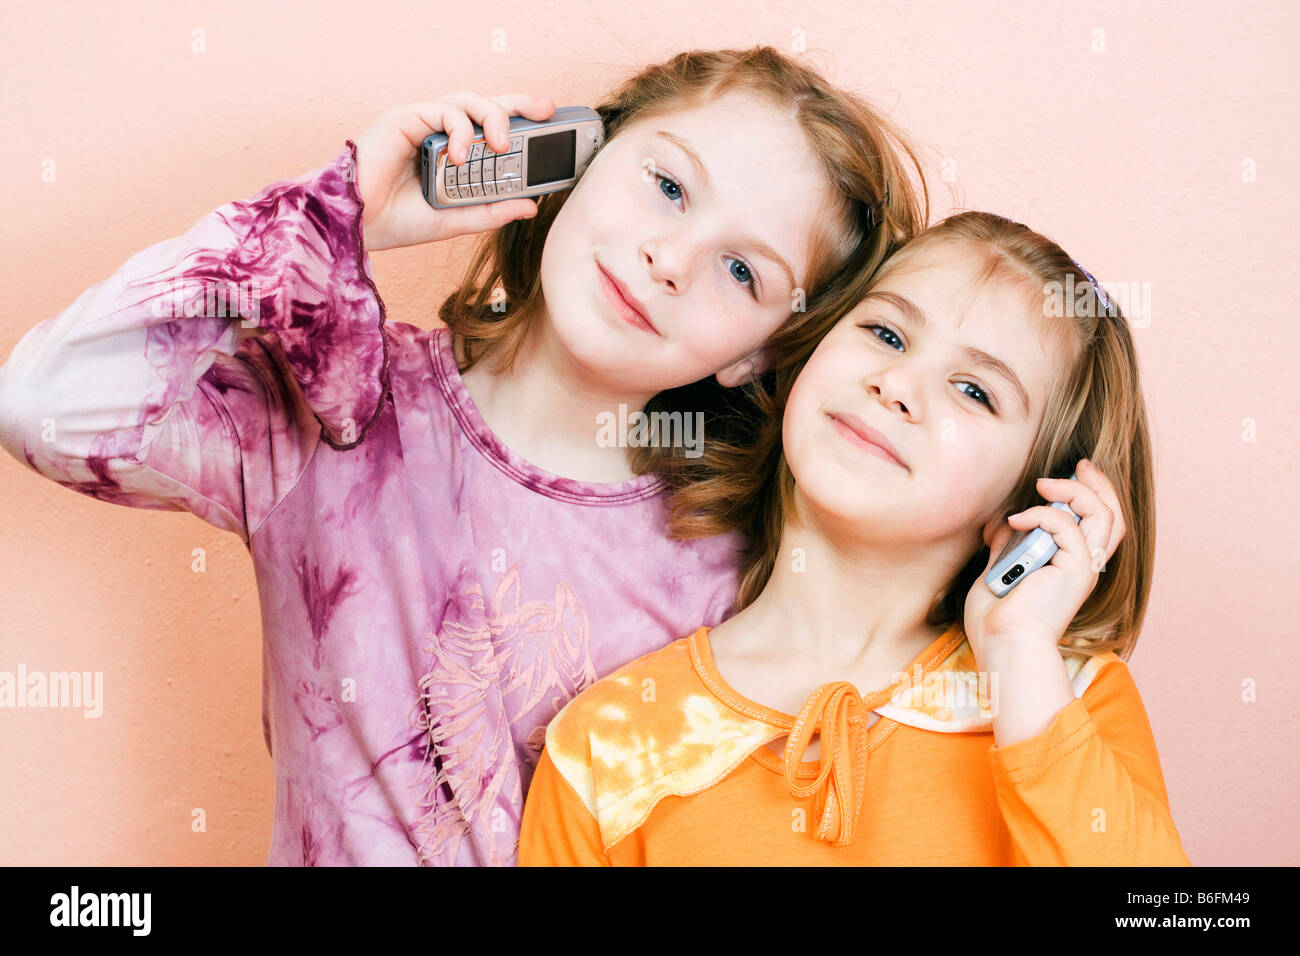 Two little girls, 9 and 6 years, telephoning Stock Photo